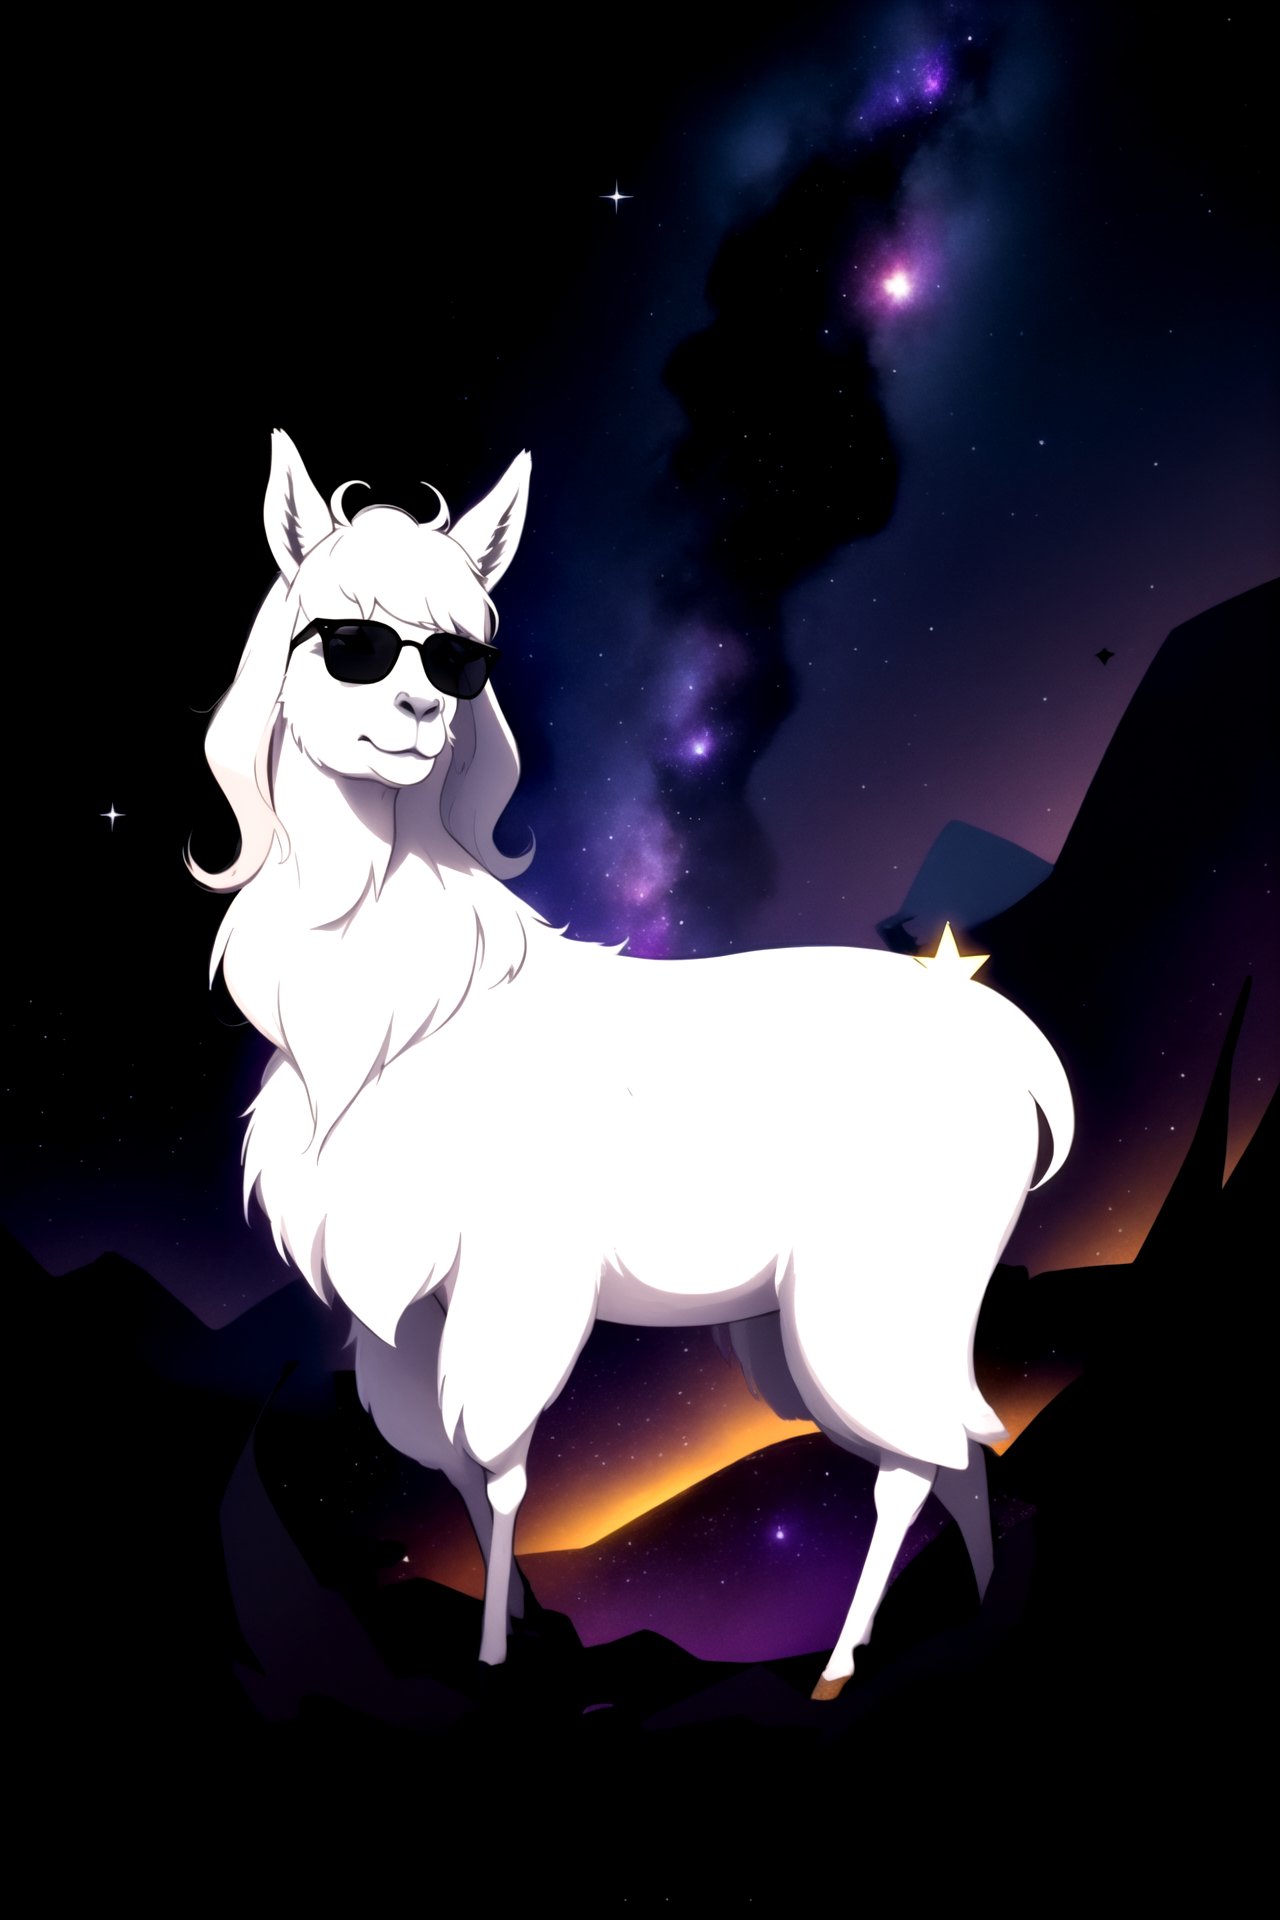 centered, digital art, | a llama dark black sunglasses on with, flying in the middle of the galaxy with stars and a star cluster, constellation, no text, no symbols, nebulosa, | smooth detailed, hyperealistic shadows,